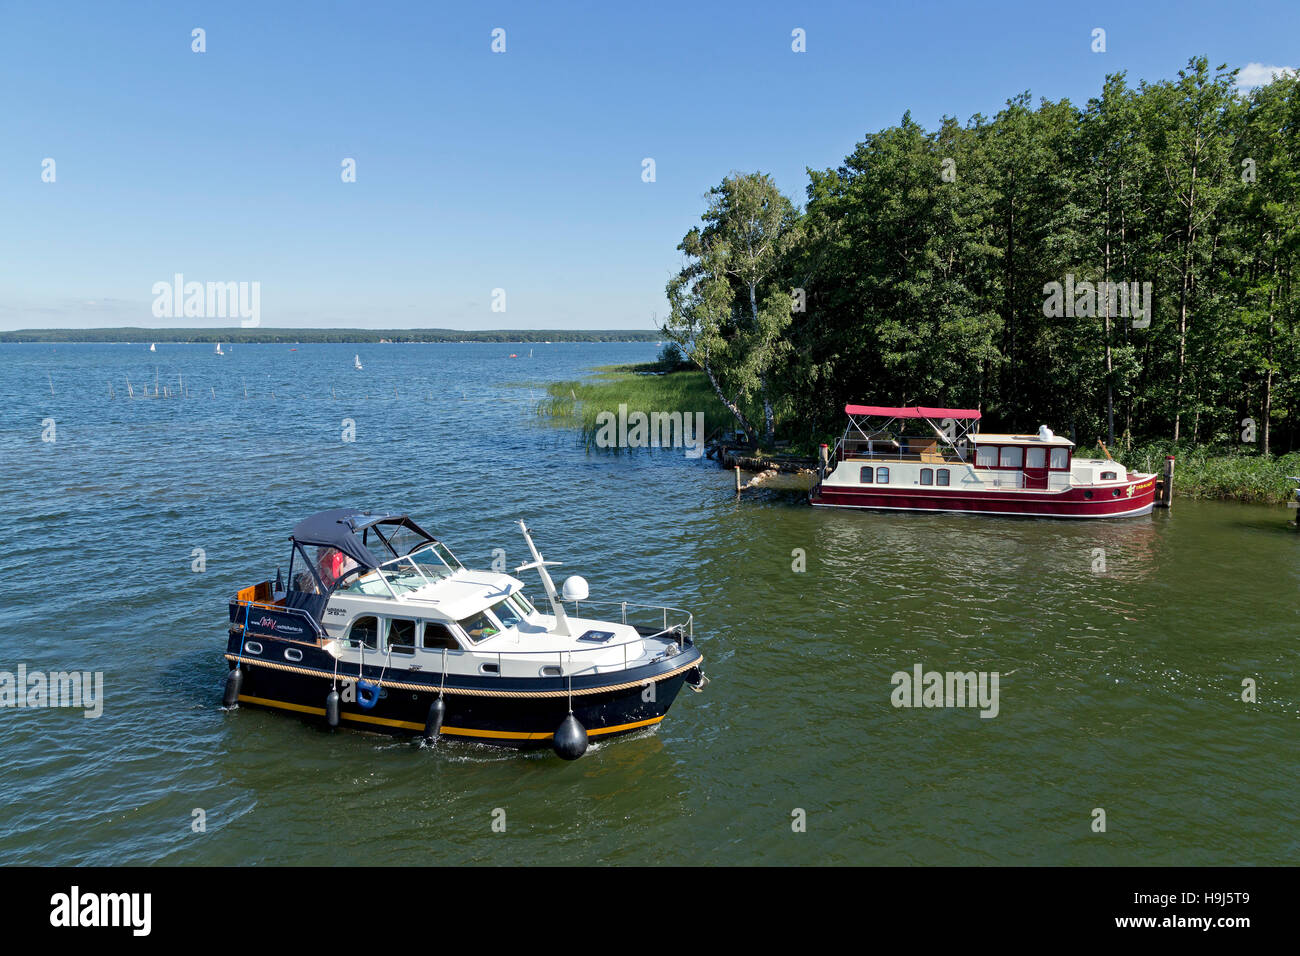 Mecklenburgische Seenplatte District High Resolution Stock Photography and  Images - Alamy